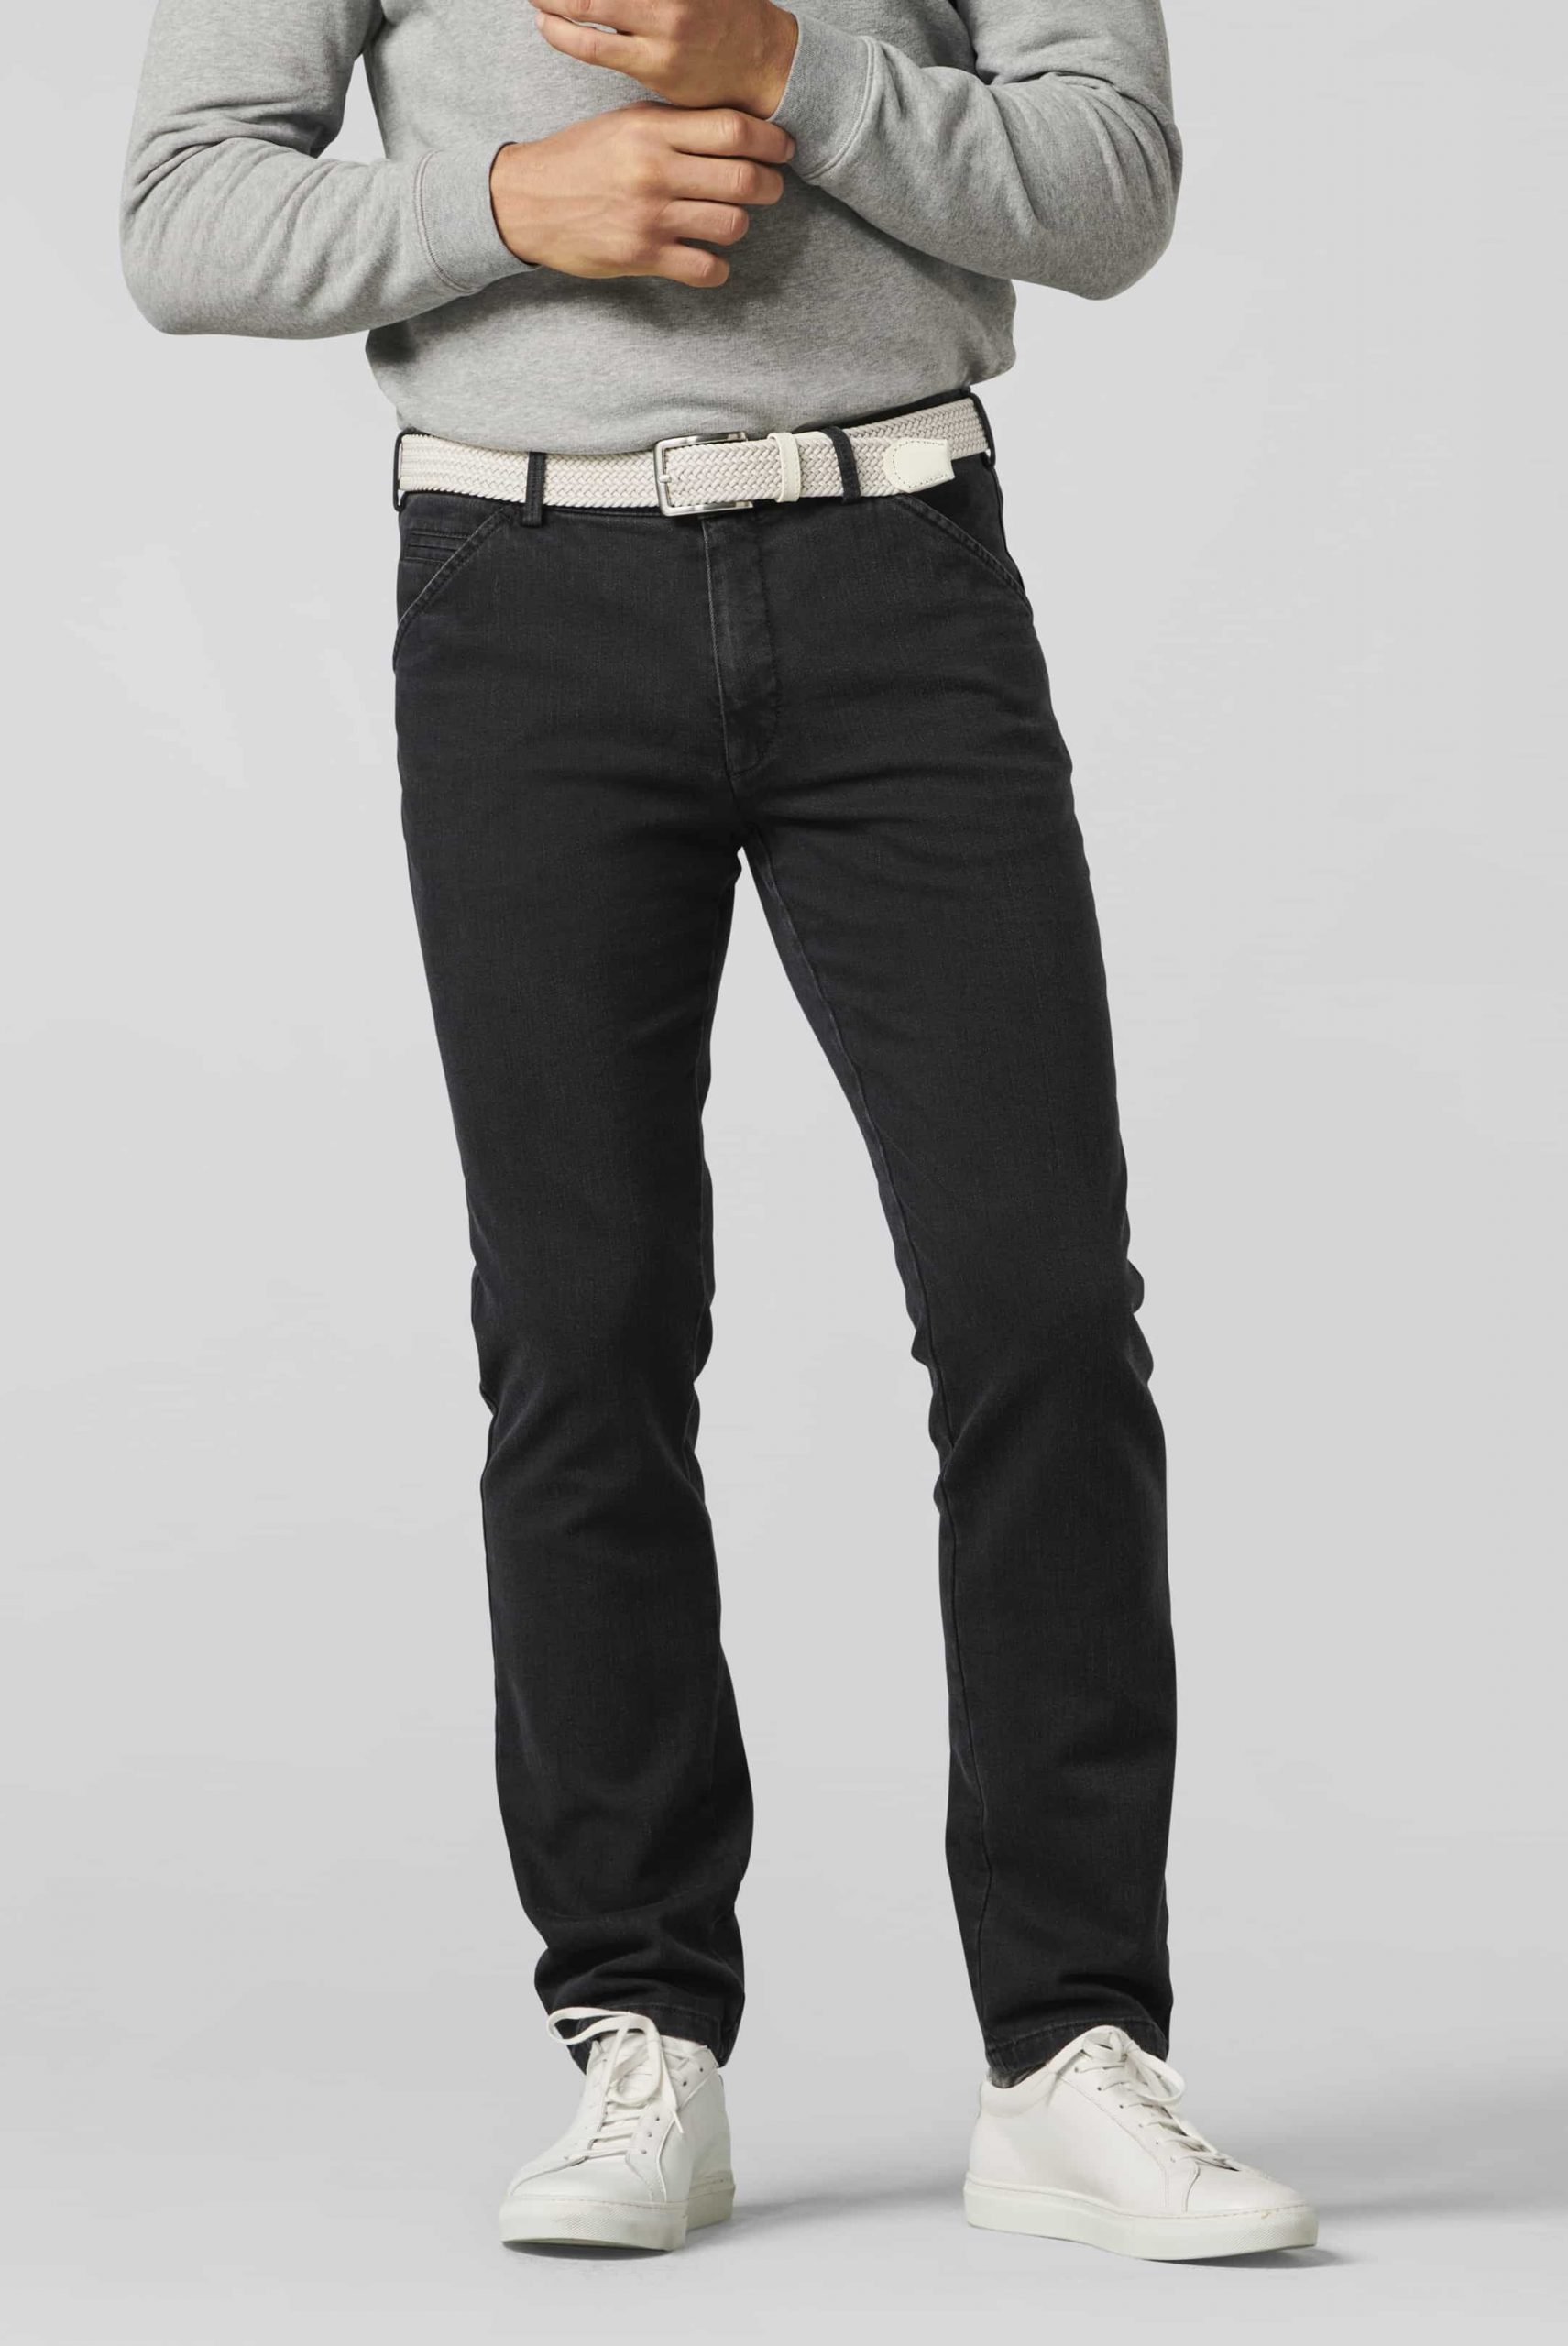 Cotton & Wool jeans Chicago (2-4539) - First For Men